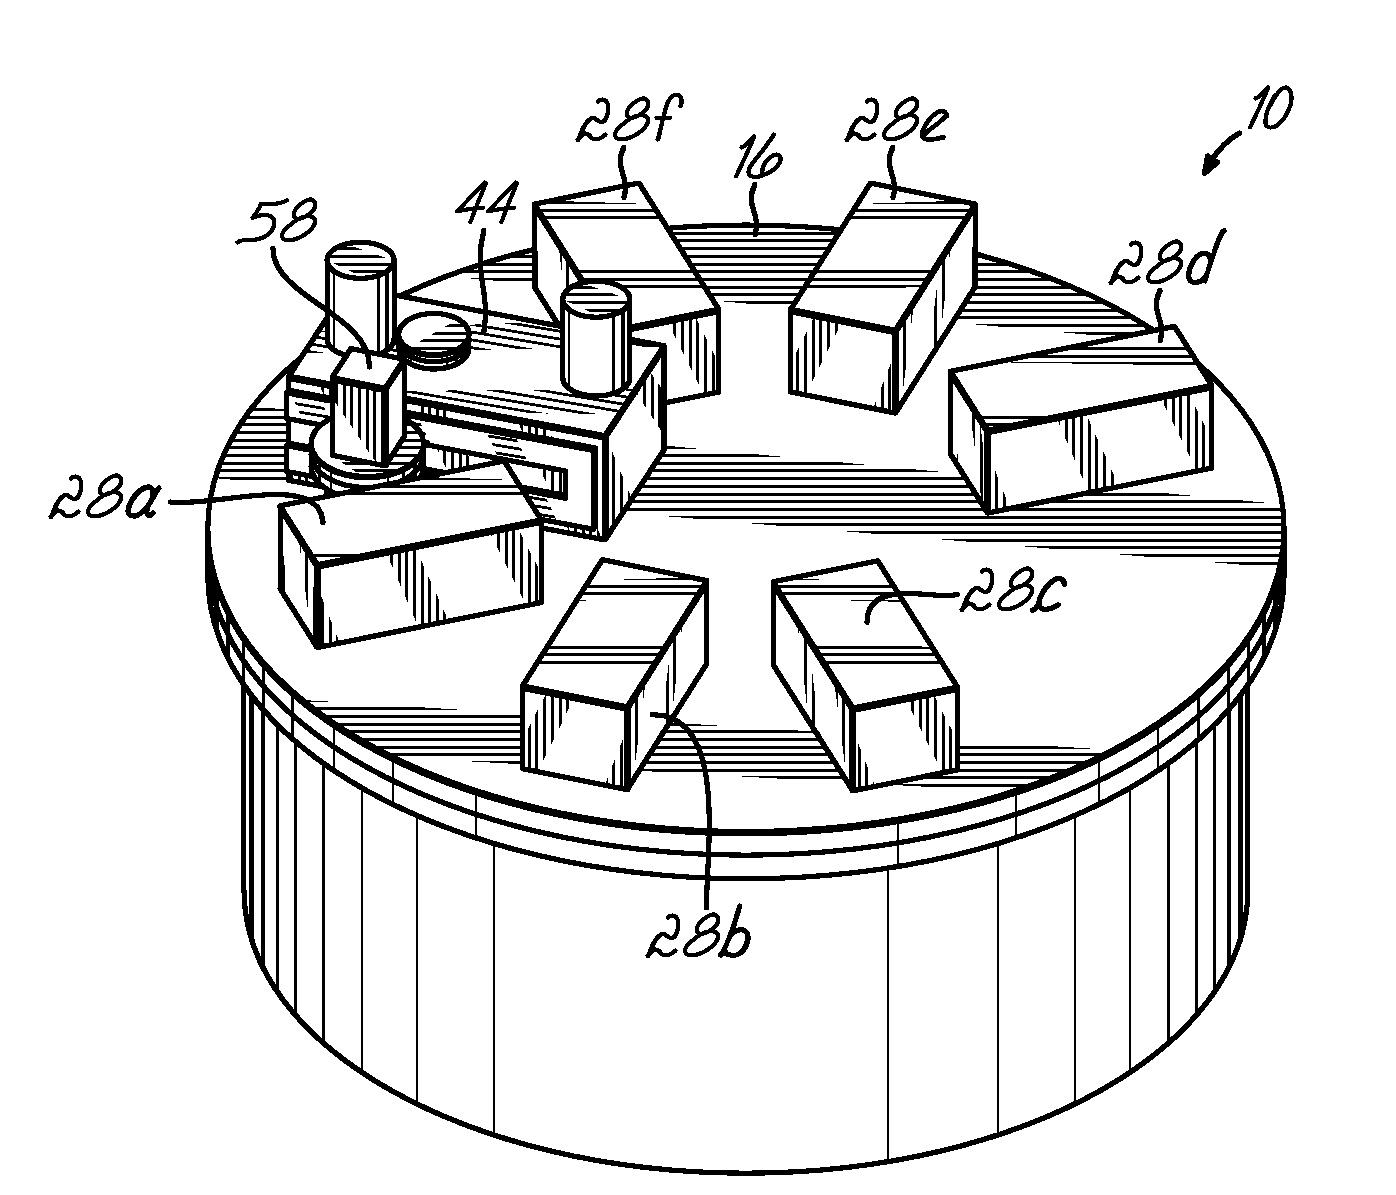 Sputter Deposition System and Methods of Use